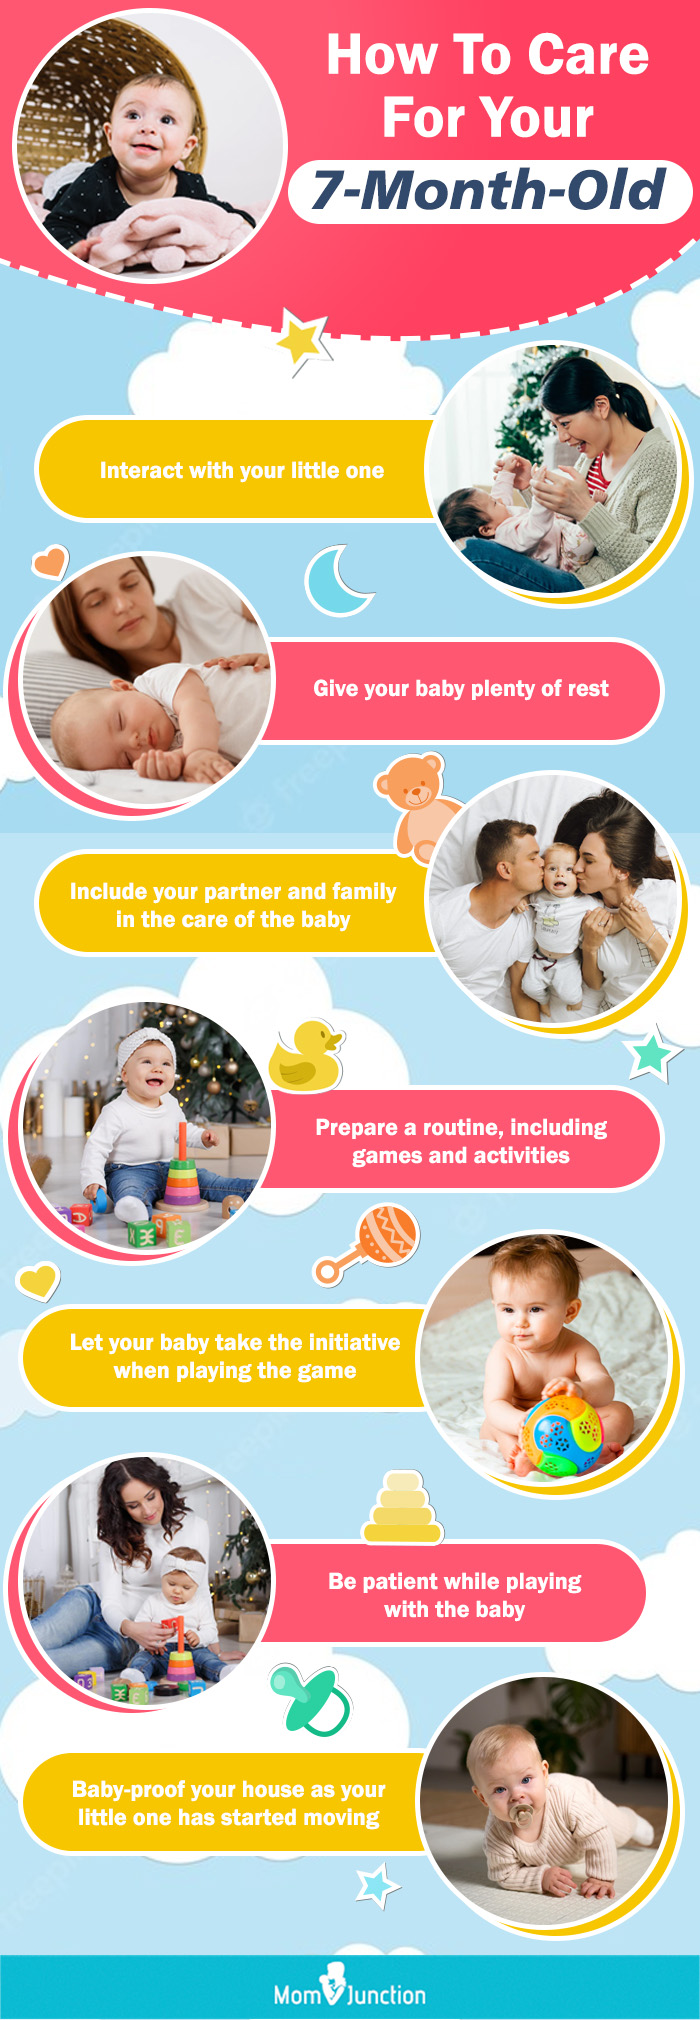 how to care for your 7 month old [infographic]